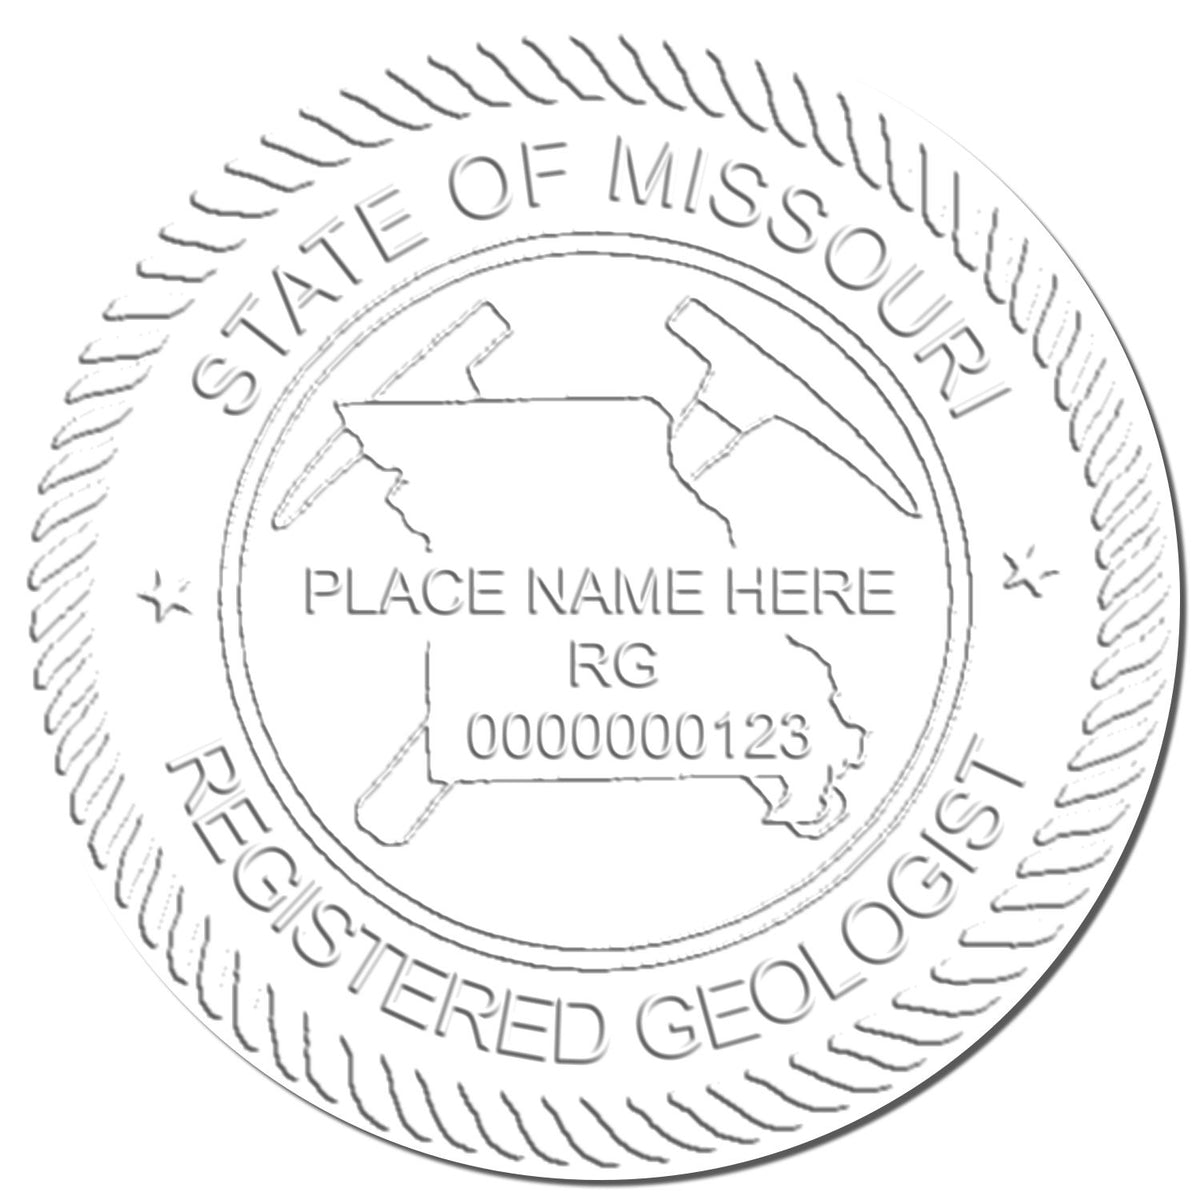 A stamped imprint of the Soft Missouri Professional Geologist Seal in this stylish lifestyle photo, setting the tone for a unique and personalized product.